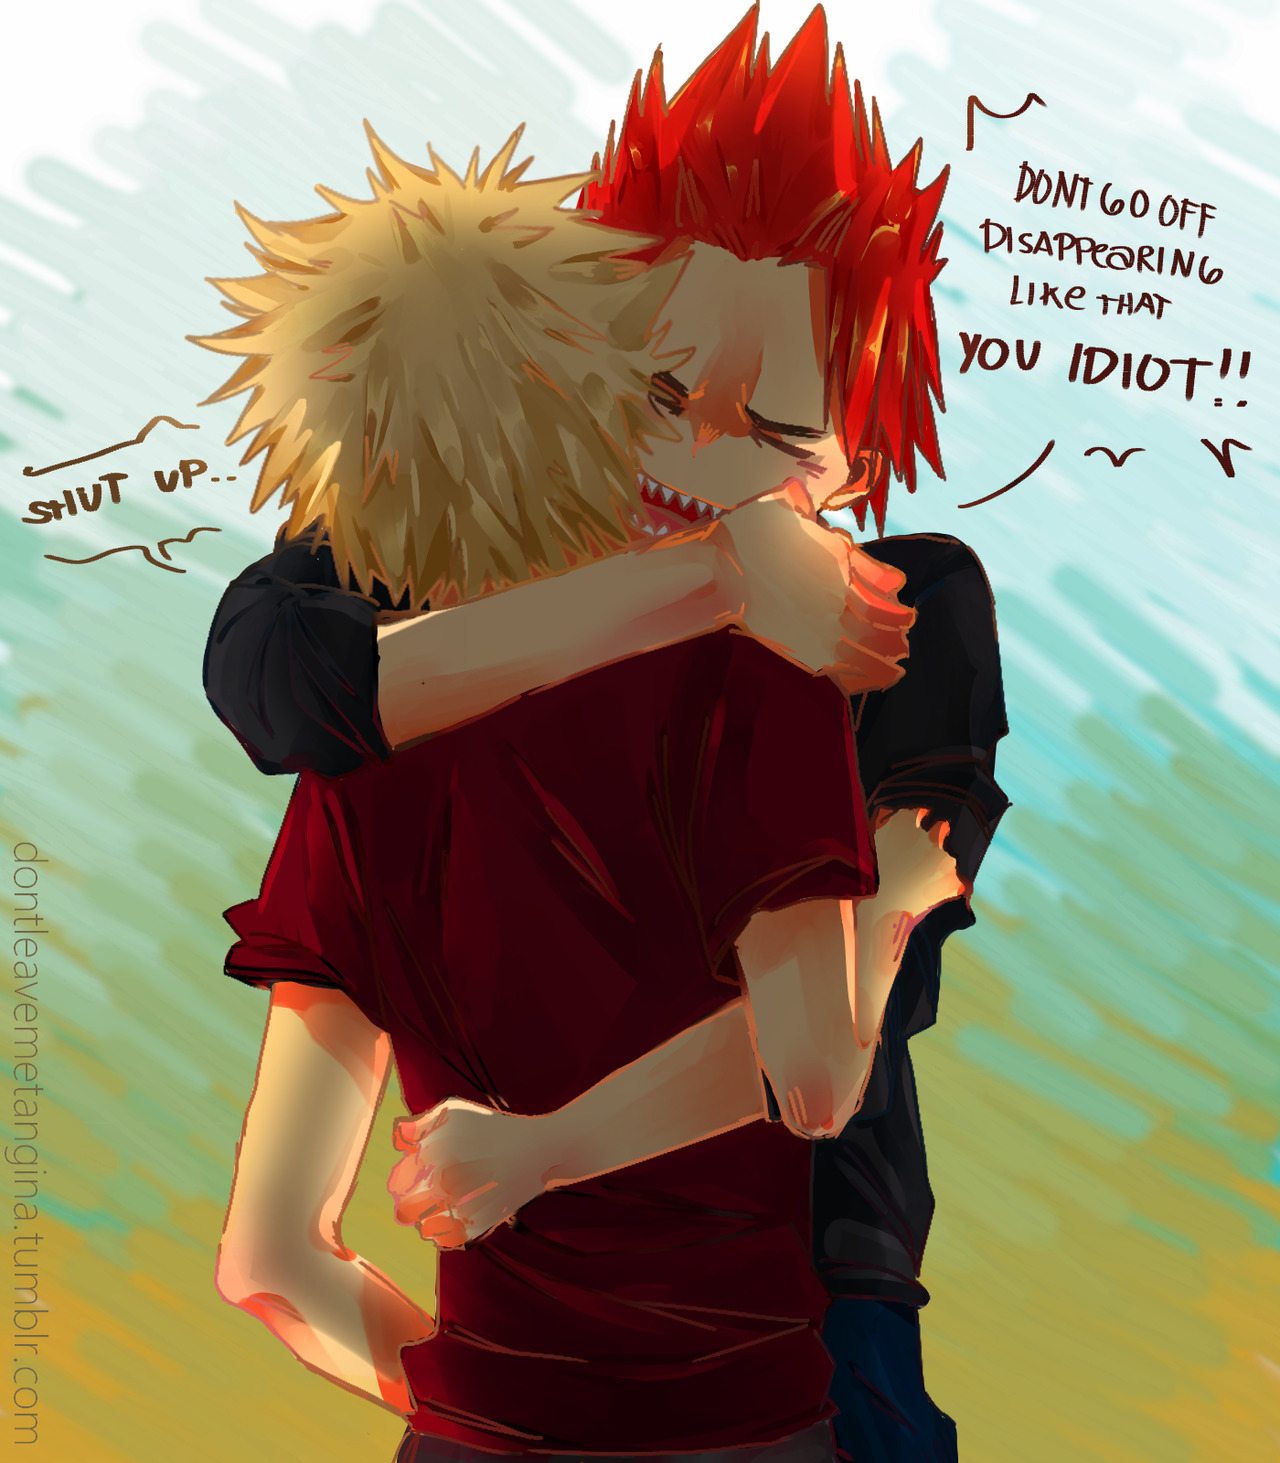 "I’m Home" Bakugou This Is My First Time Posting た わ ご と の 帝 国.